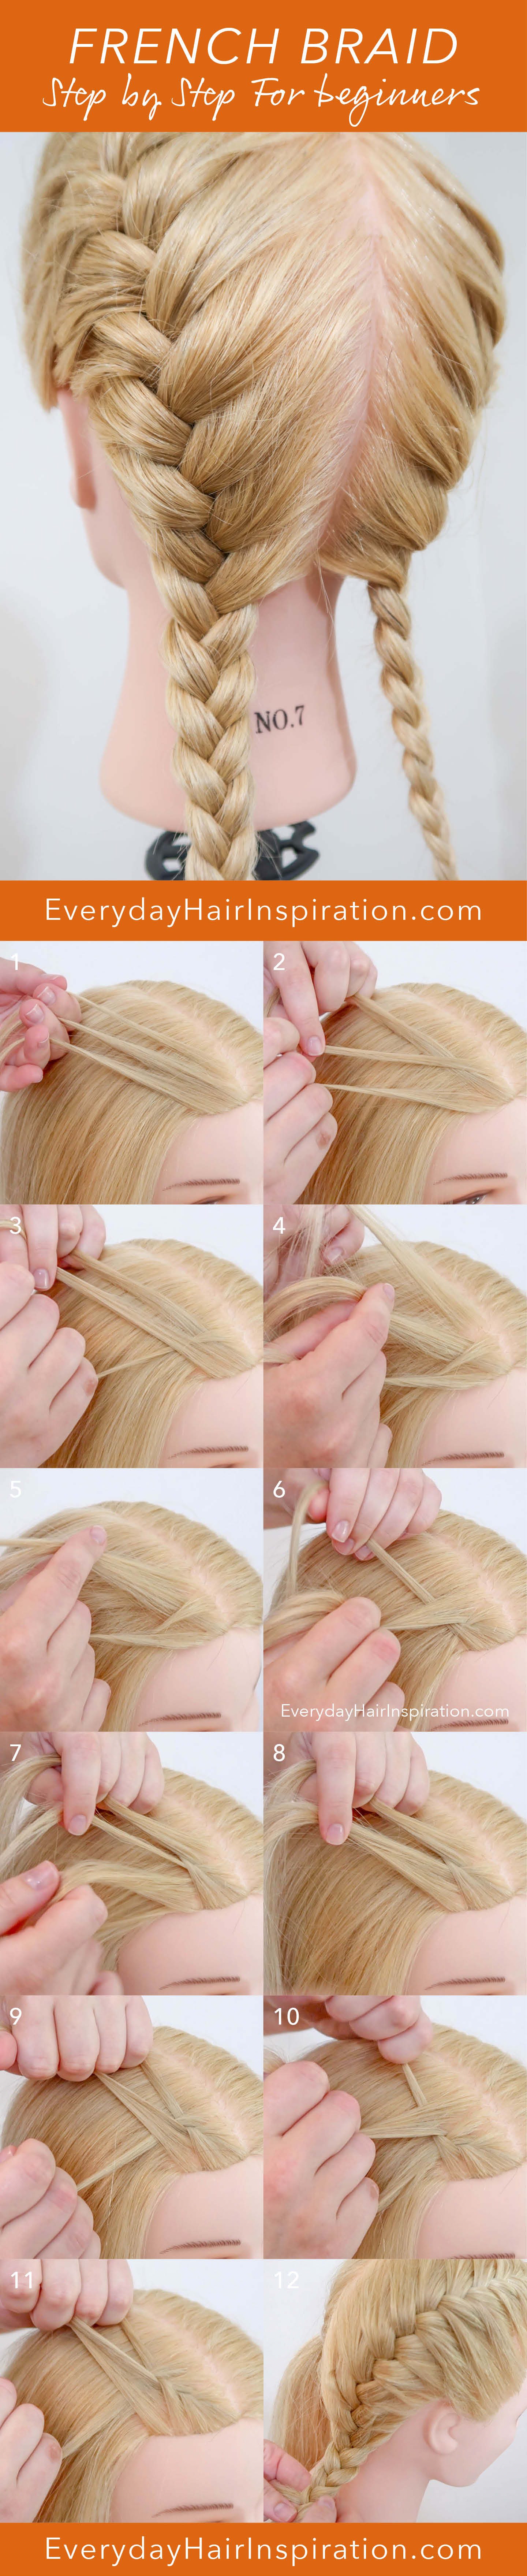 How To French Braid - Step by Step Tutorial on French Braids